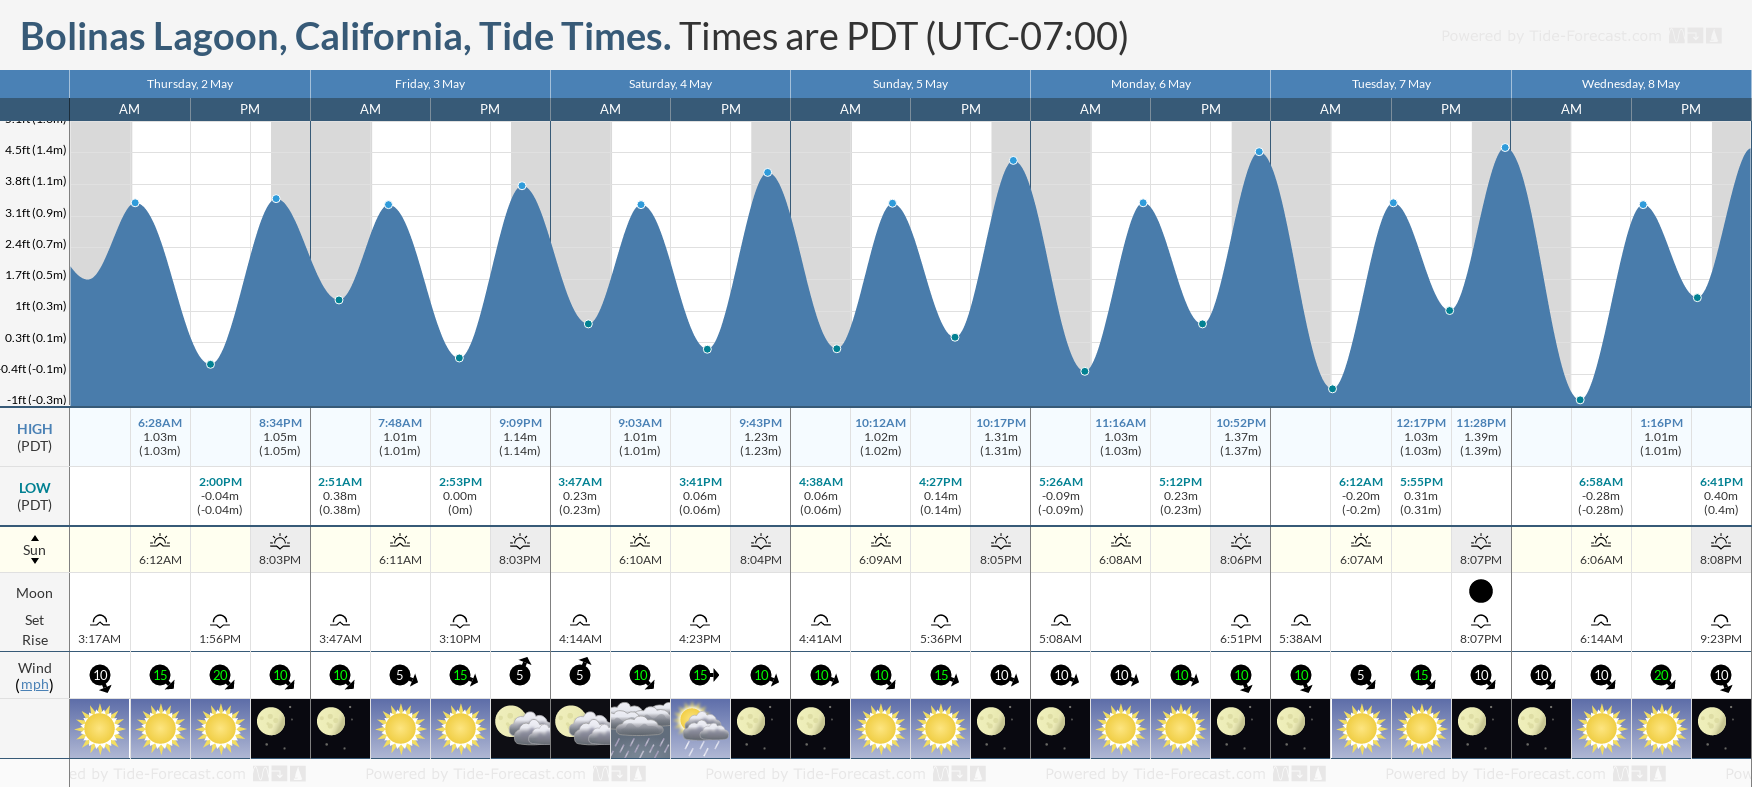 Bolinas Lagoon, California Tide Chart including high and low tide tide times for the next 7 days